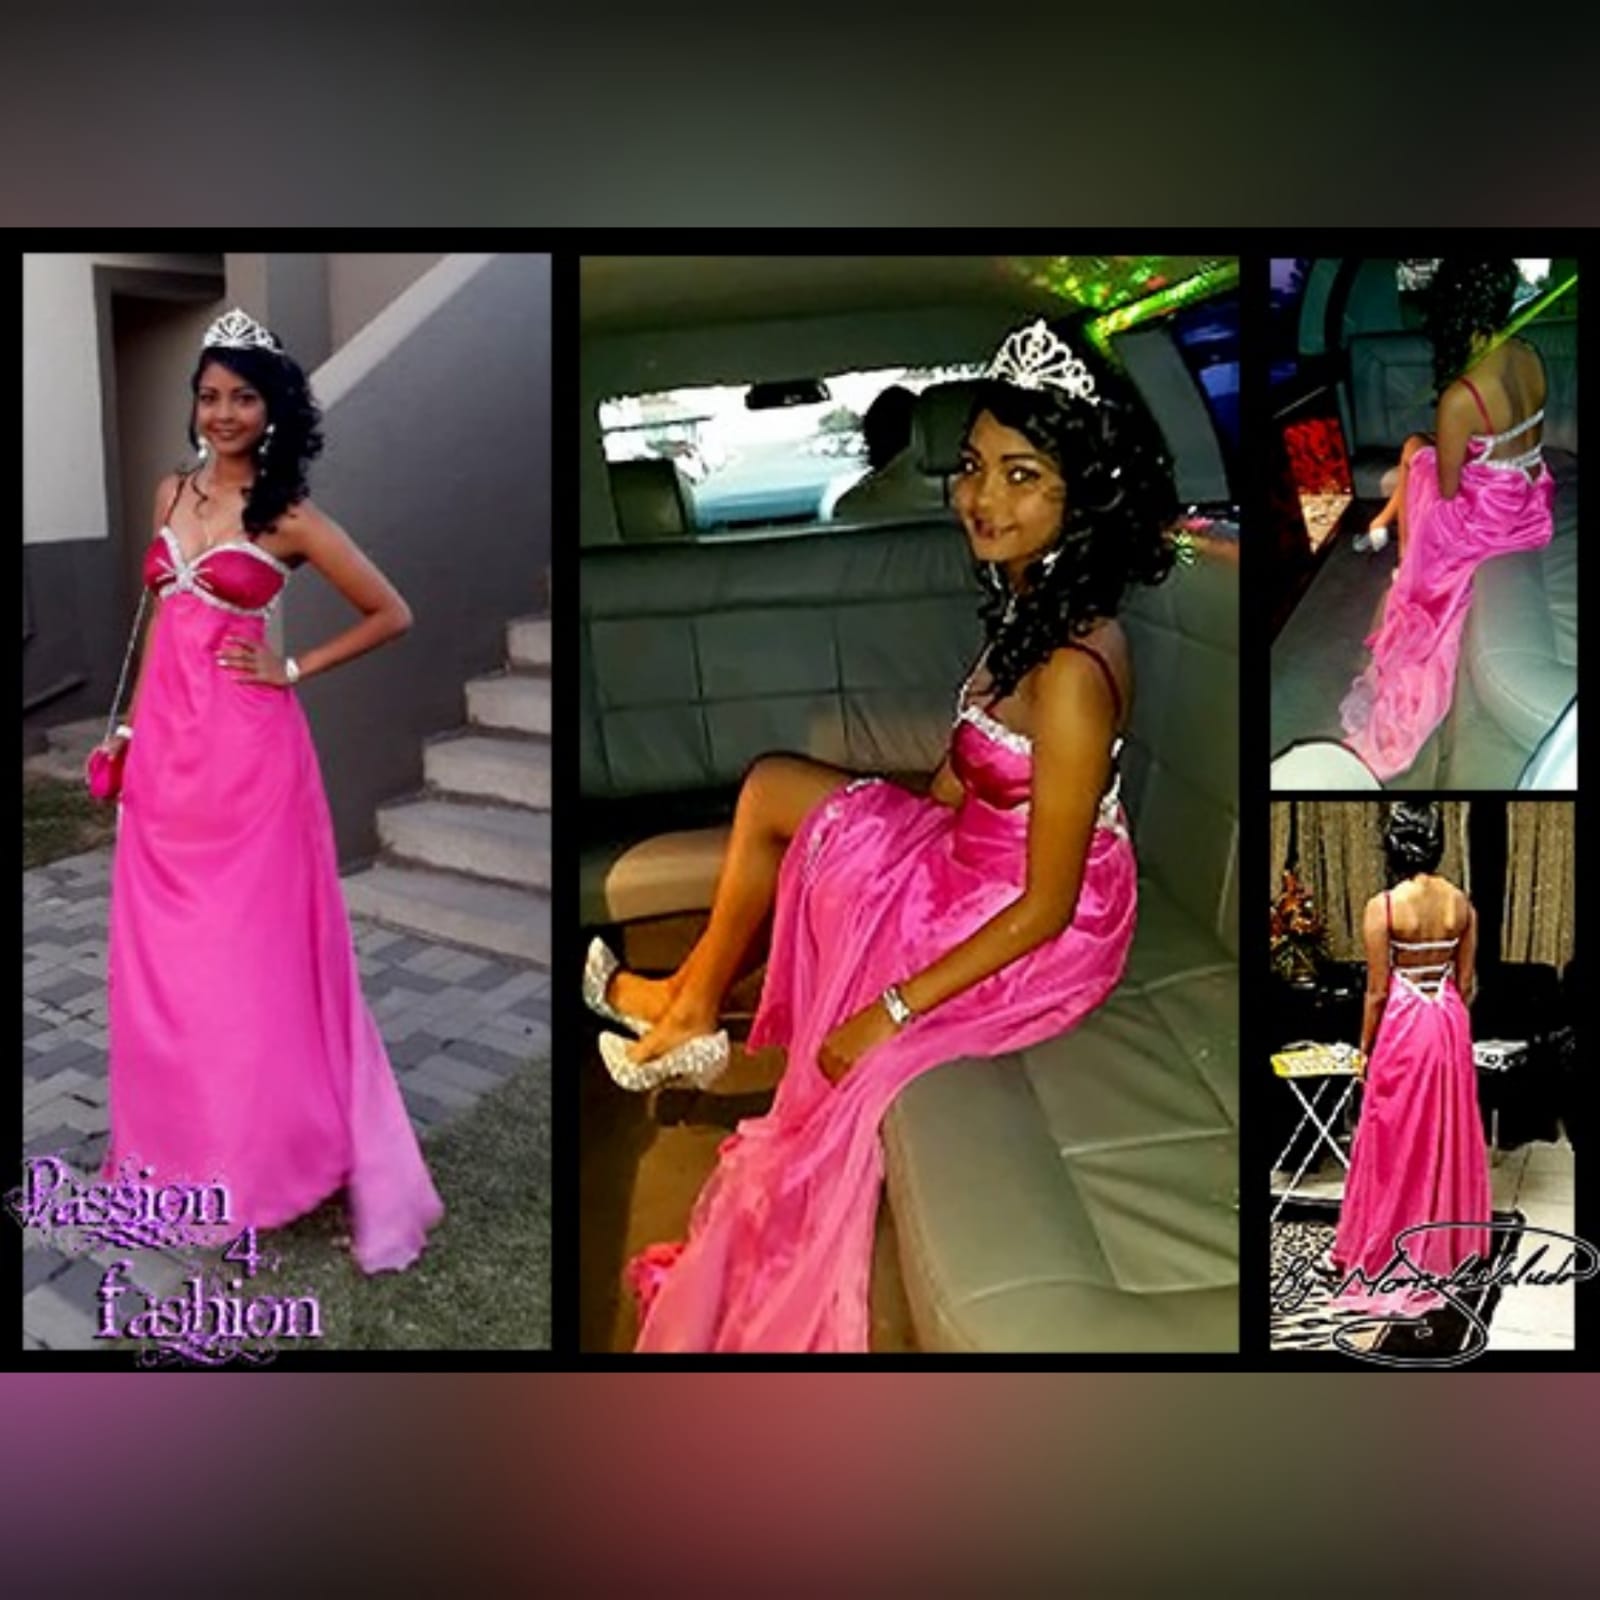 Cerise pink long chiffon evening dress 2 cerise pink long chiffon evening dress for a beauty pageant. Detailed in silver